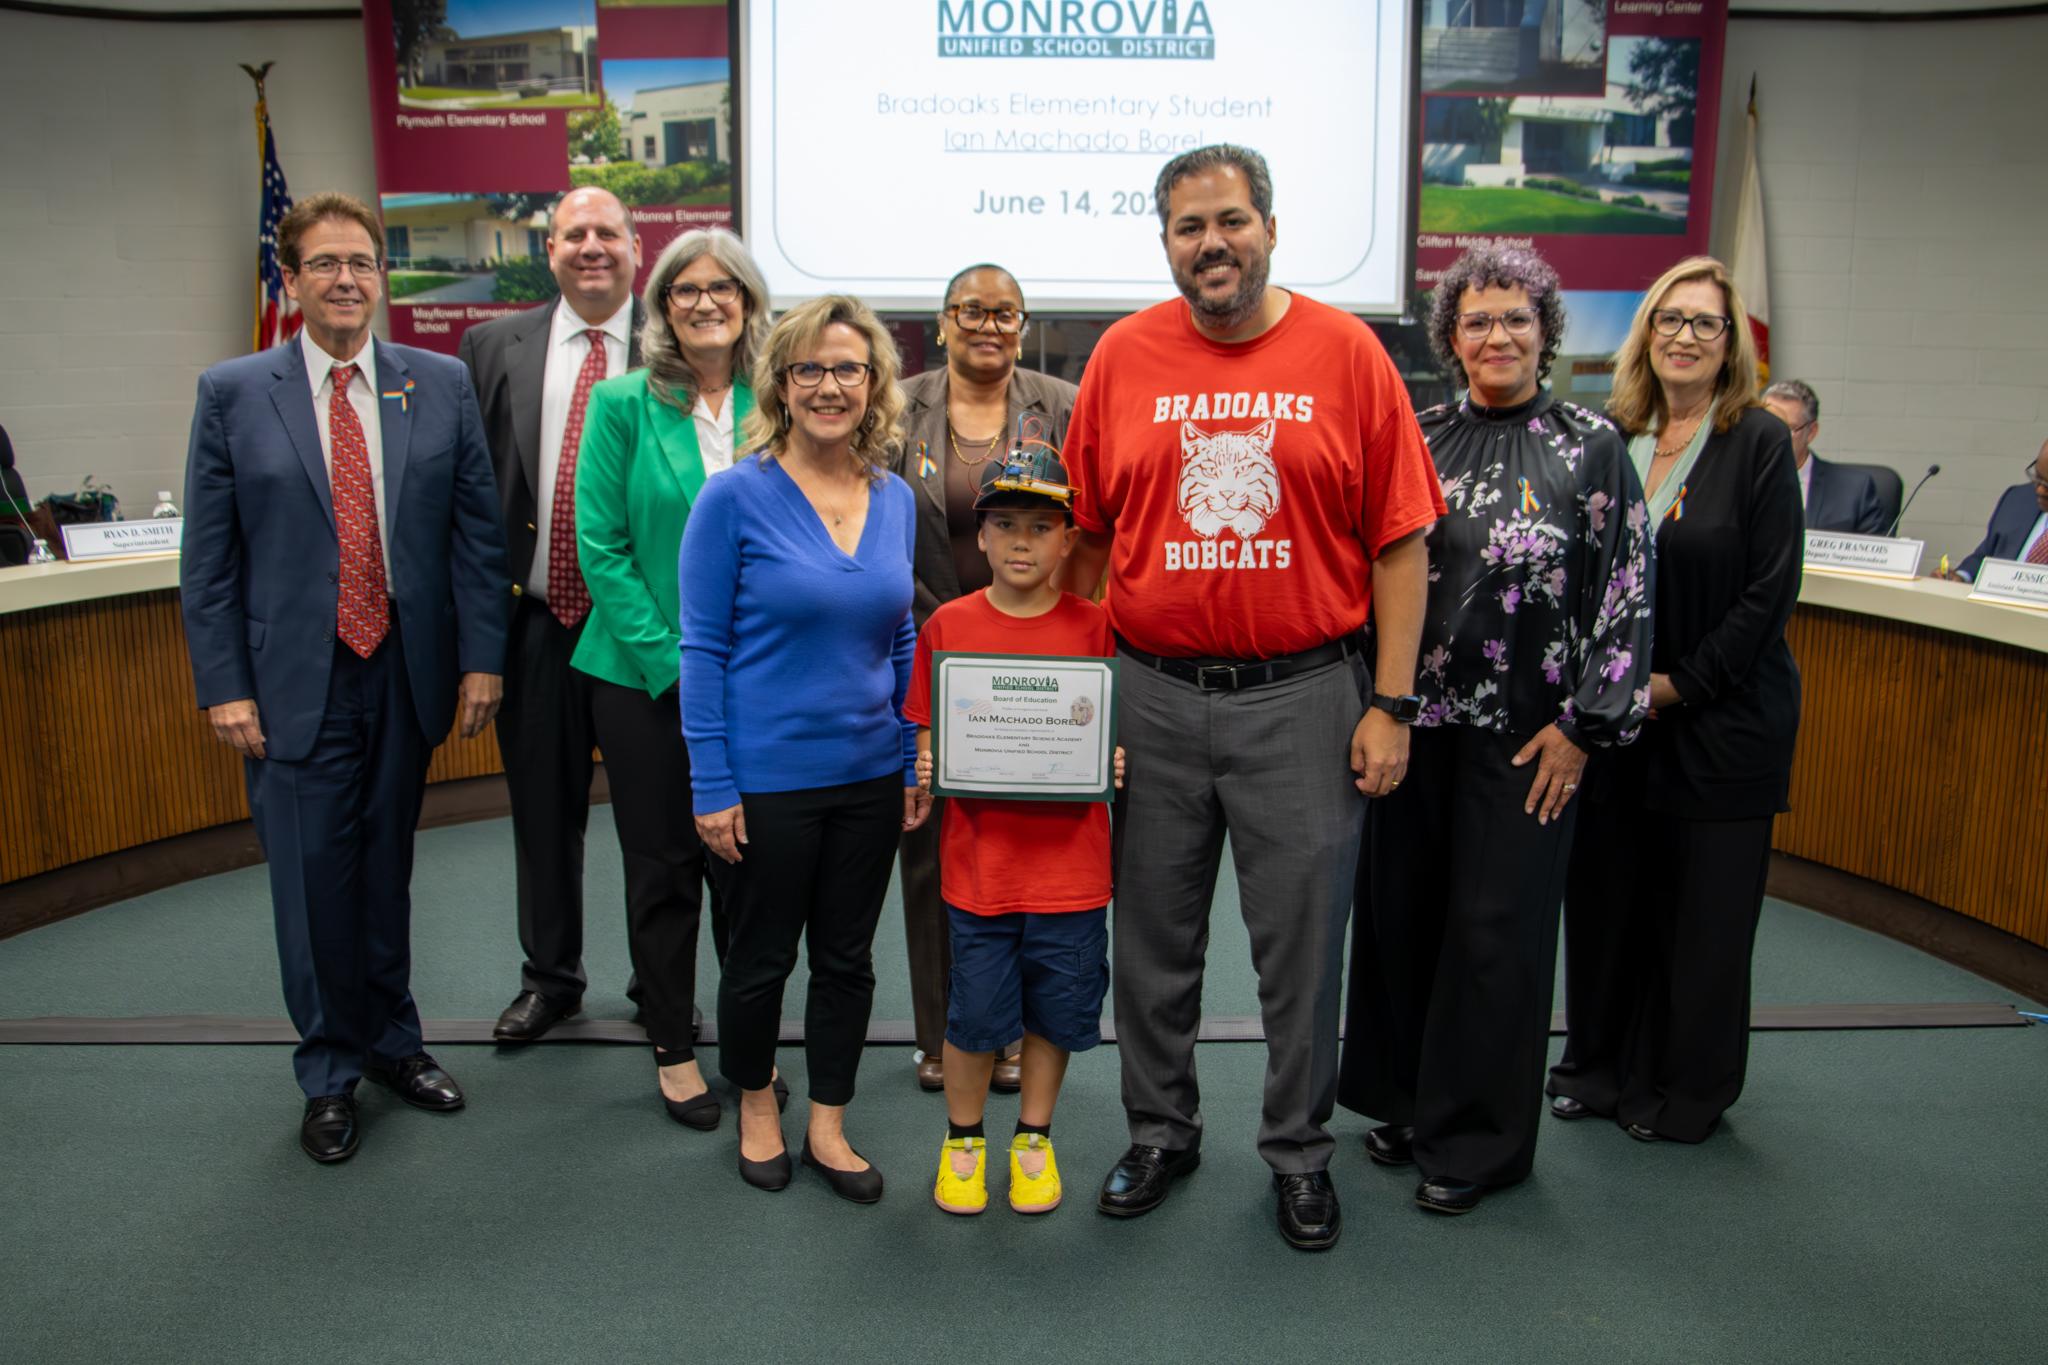 Applauding Bradoaks student Ian Machado Borel for his amazing invention! At the June 14th board meeting, he presented his hat that alerts the visually impaired with a beep, providing crucial information about obstacles ahead.